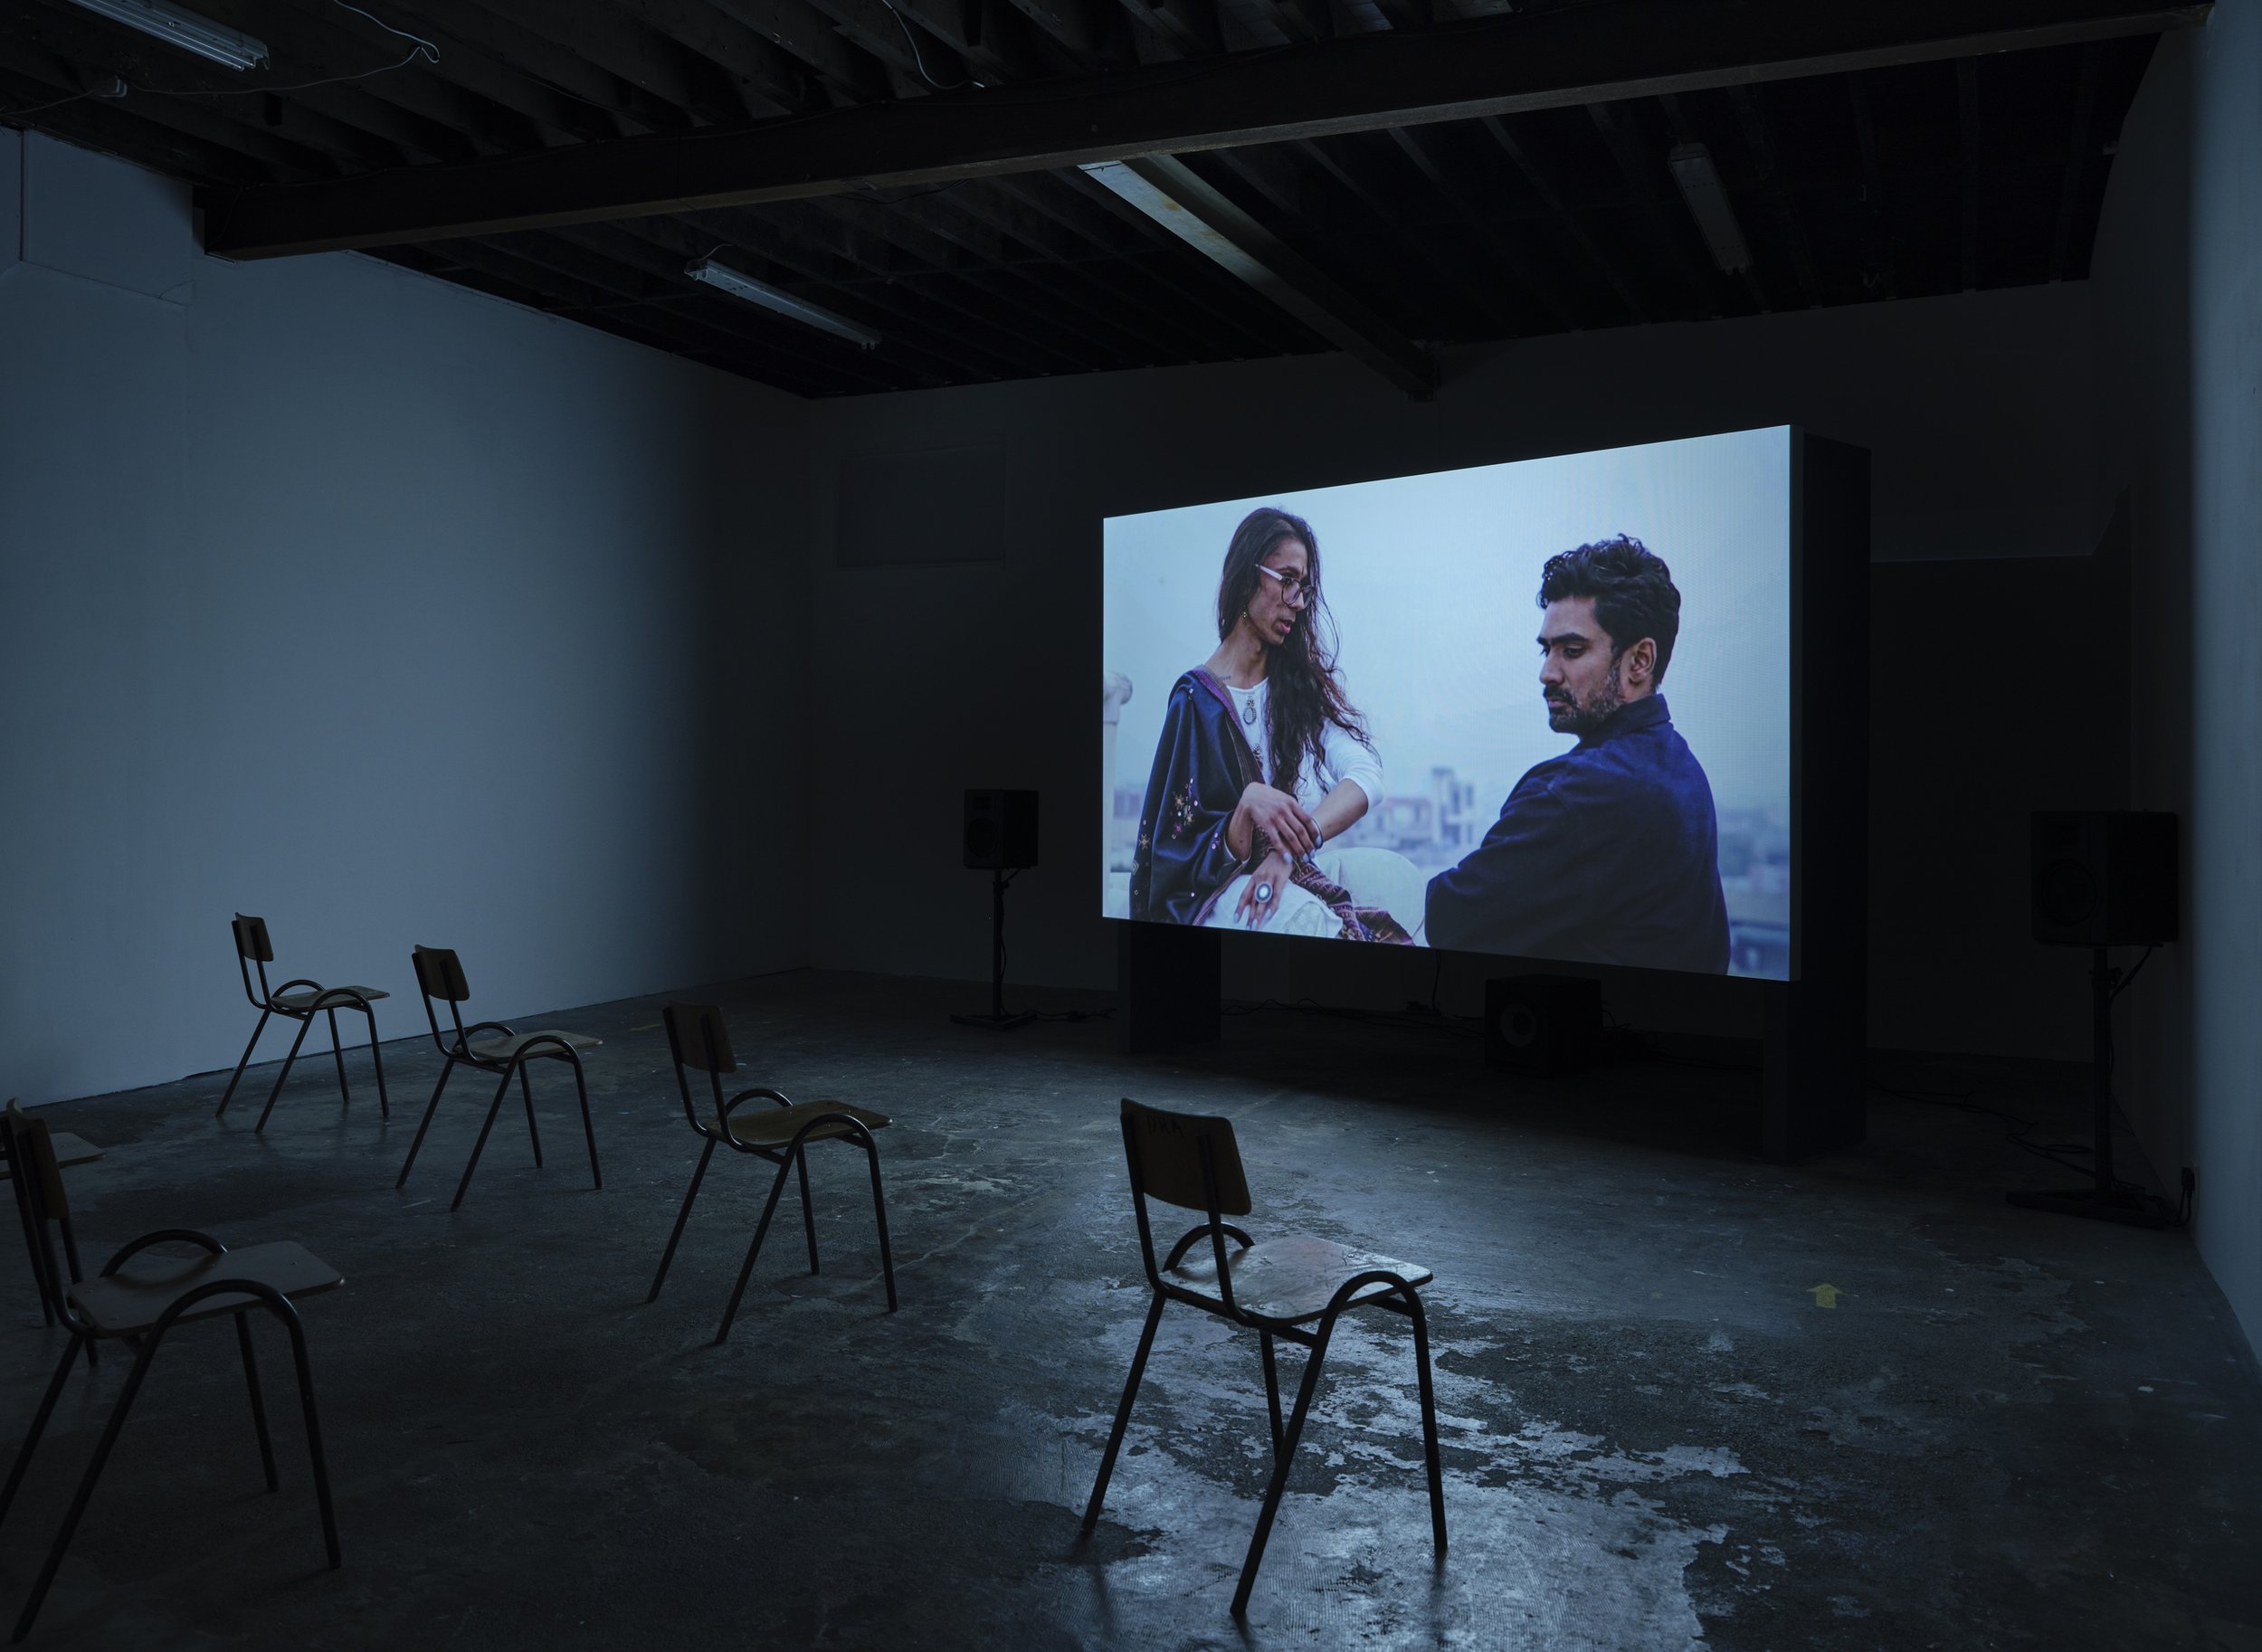  Vishal Jugdeo &amp; vqueeram,&nbsp;Does Your House Have Lions, 2021, HD video with sound, 48 minutes; photograph by Ros Kavanagh, courtesy of the artists. 